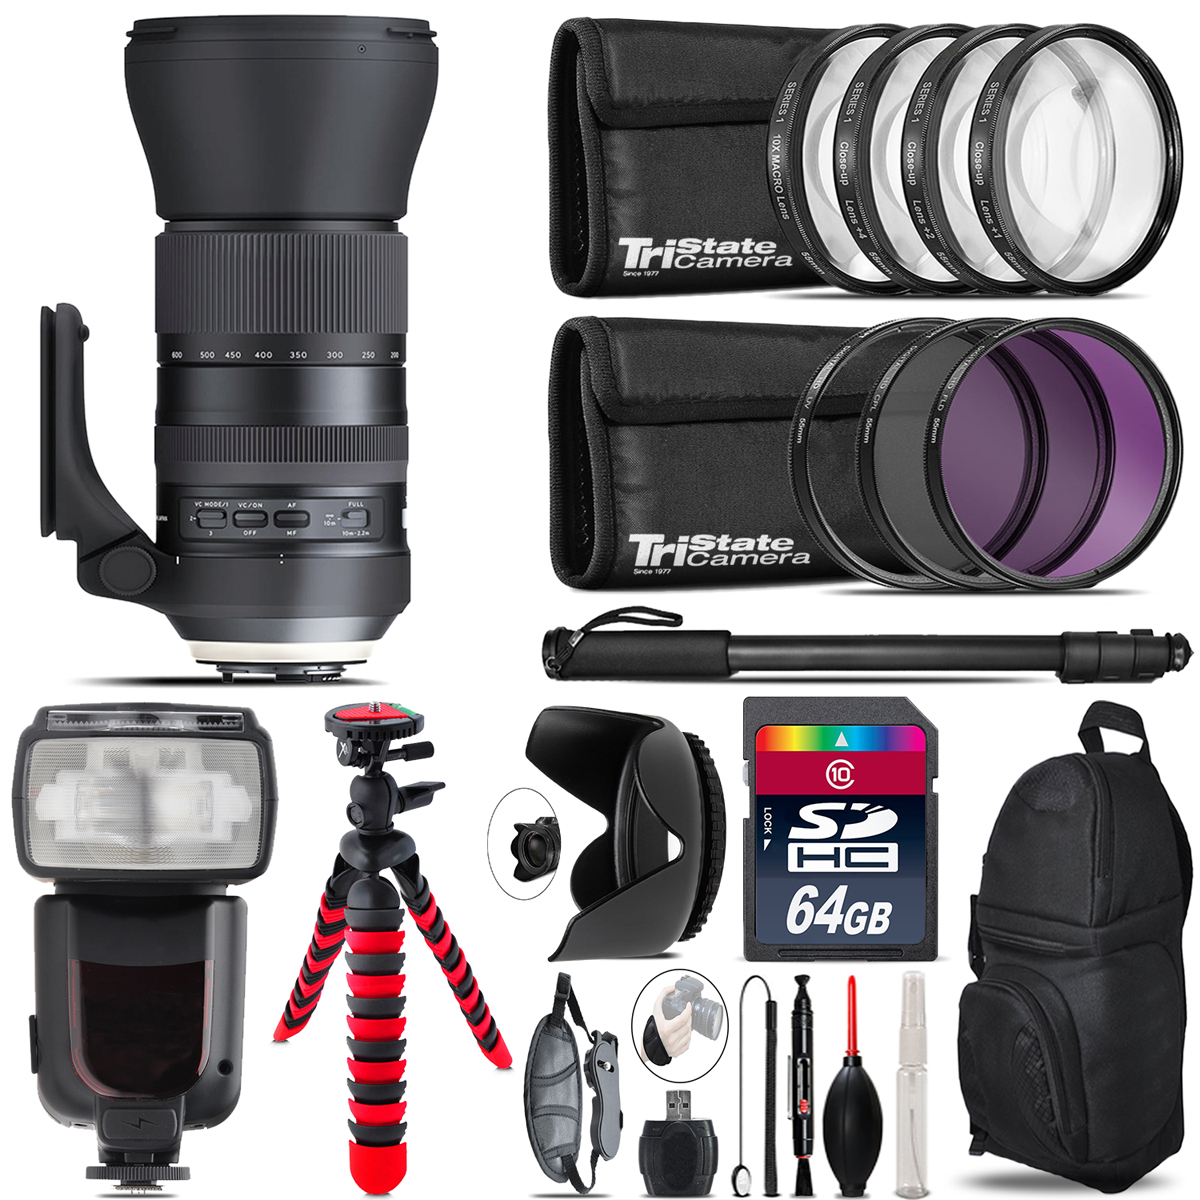 Tamron 150-600mm G2 for Nikon + Professional Flash & More - 64GB Accessory Kit *FREE SHIPPING*